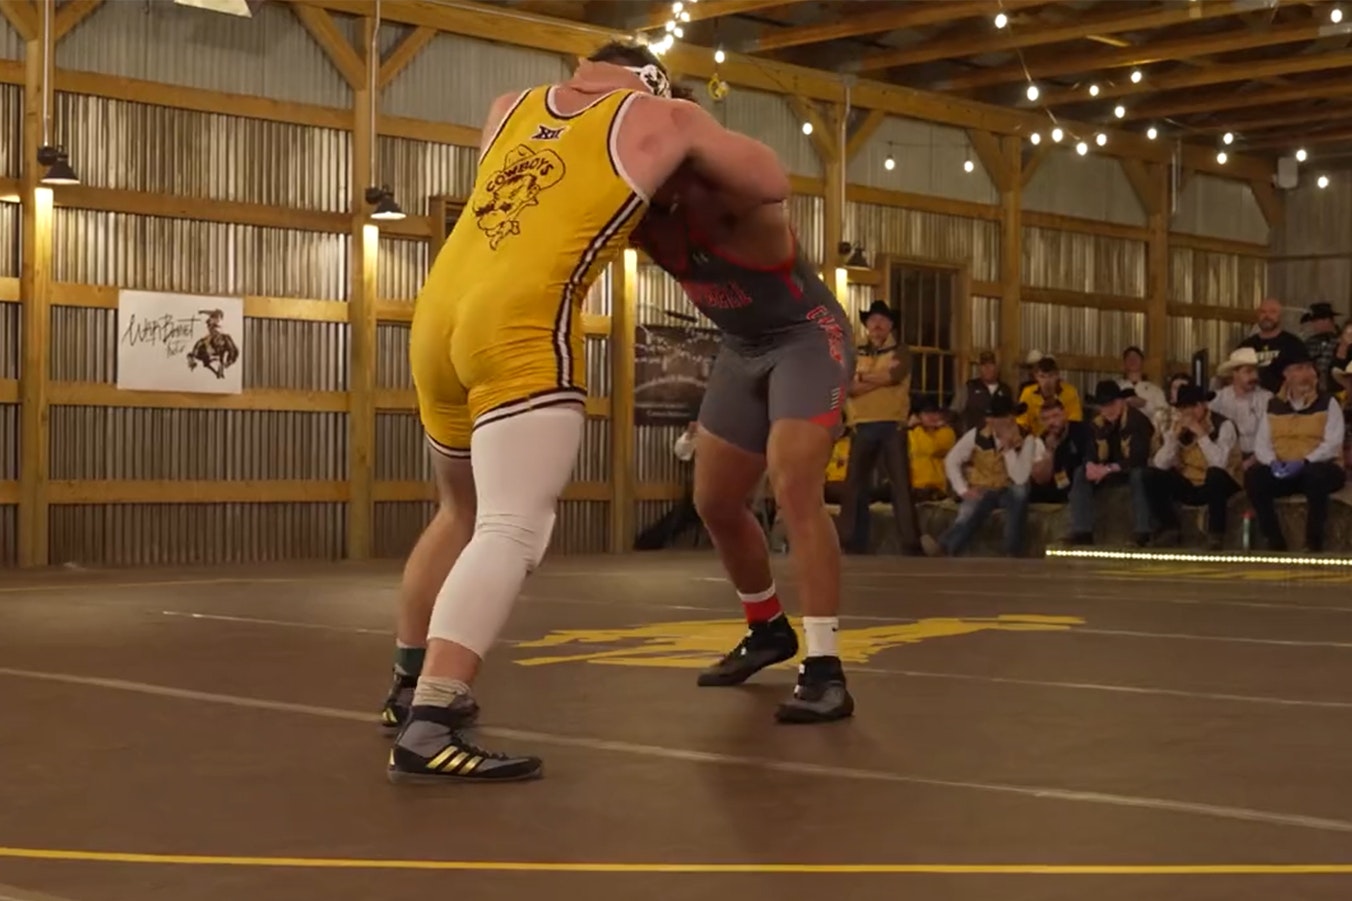 A University of Wyoming grappler ties up with an opponent from Campbell University in a barn on the Deerwood Ranch in Centennial, Wyoming, dubbed "The Battle in the Barn."